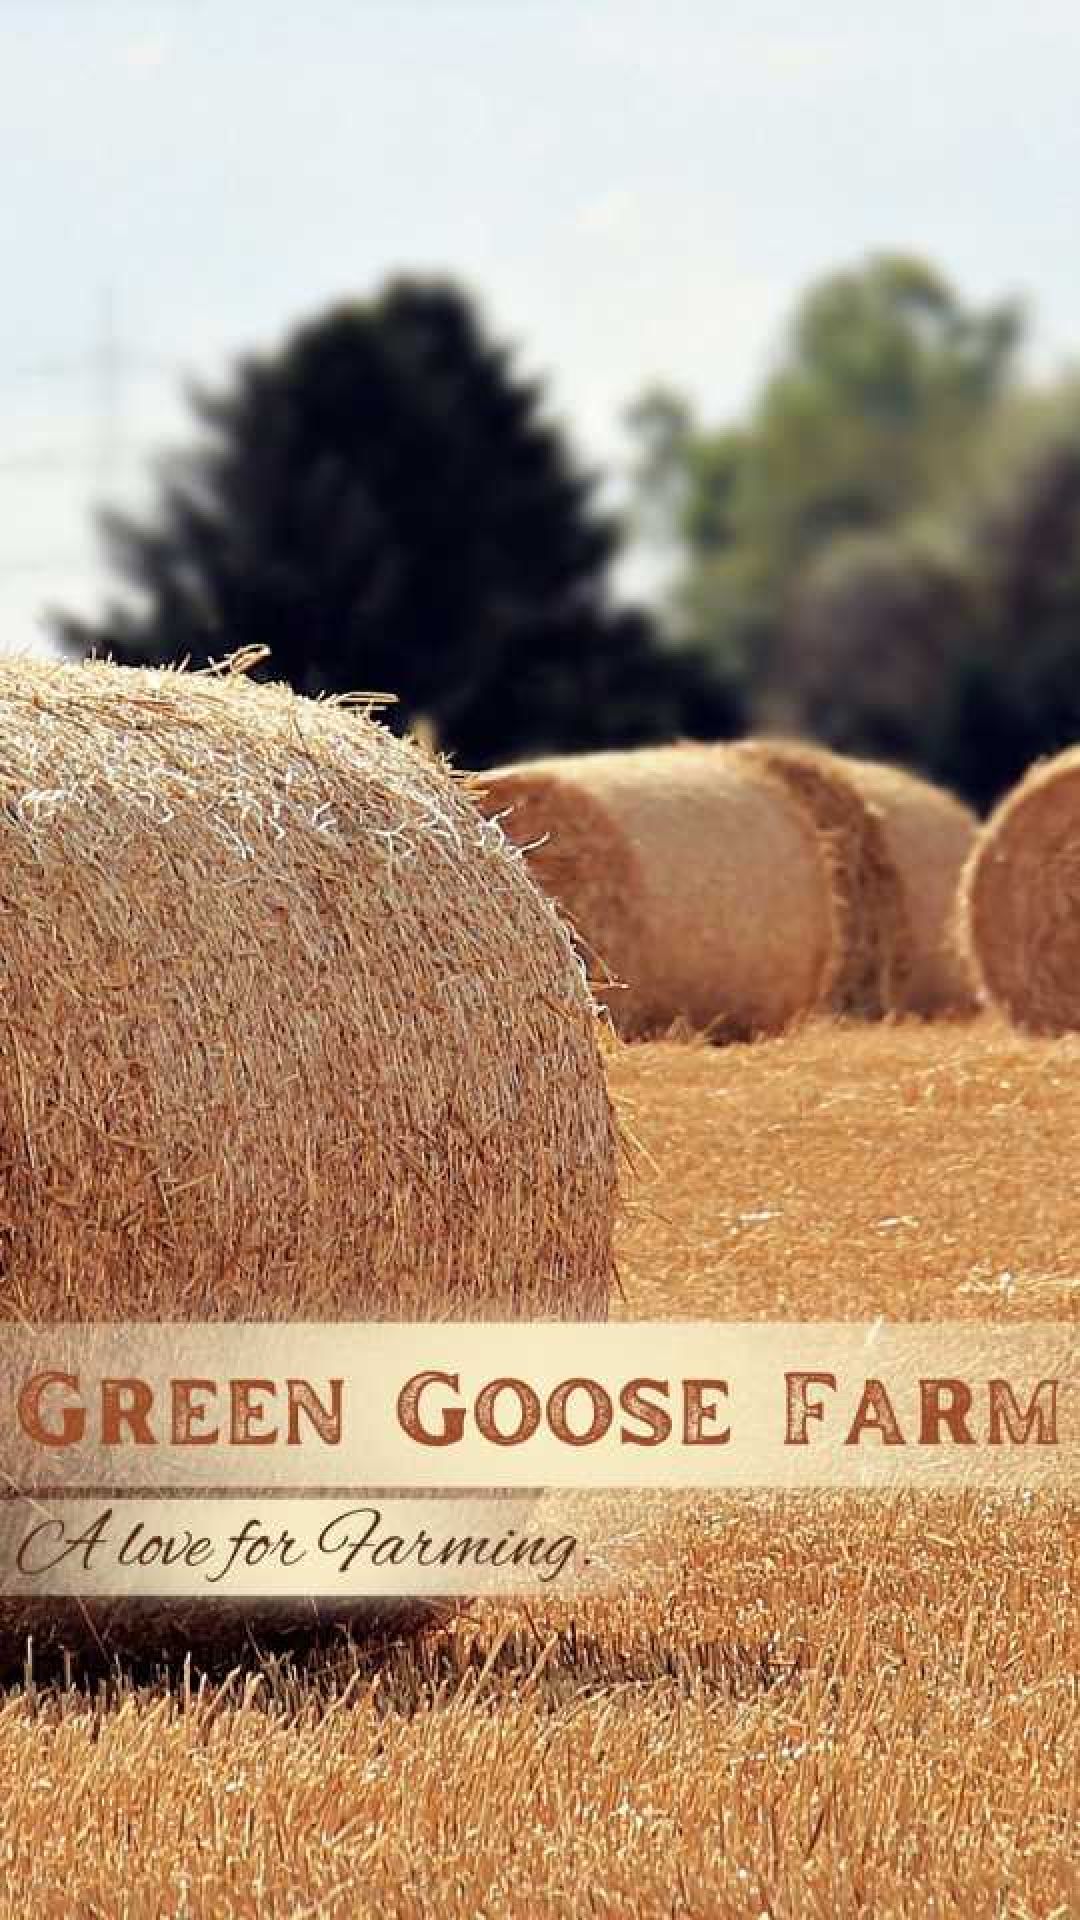 Hay bales on farmland with forest in the background, text displaying "green goose farm a love for farming"